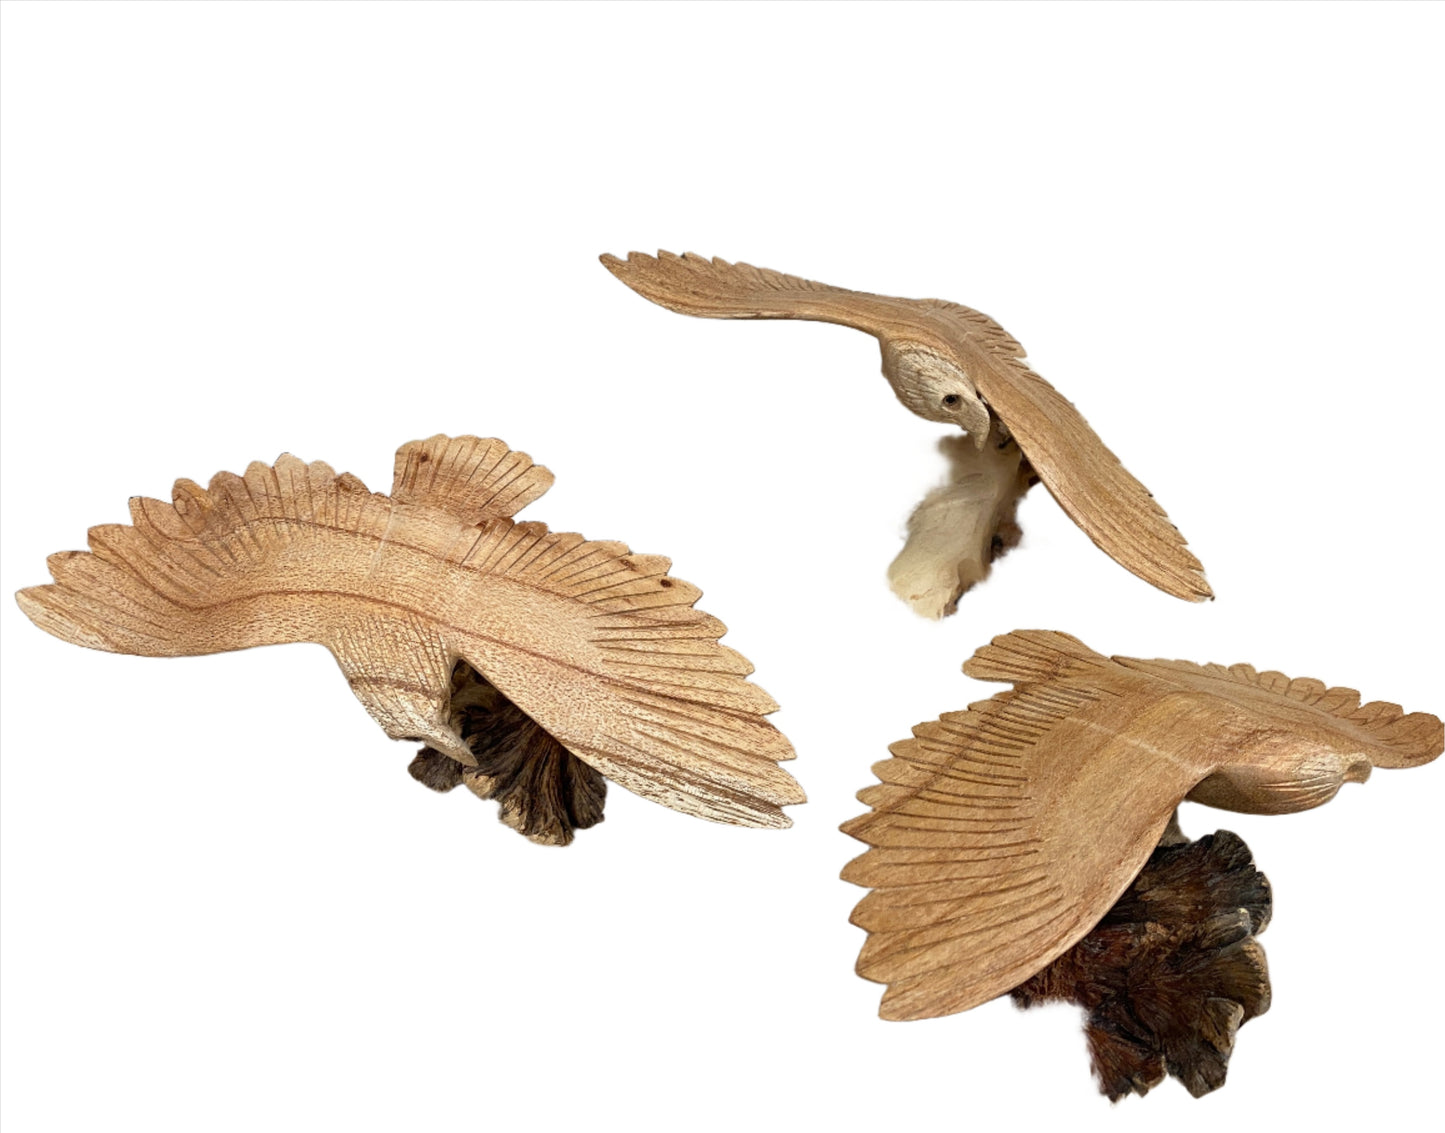 Parasite Wood Eagle Carvings